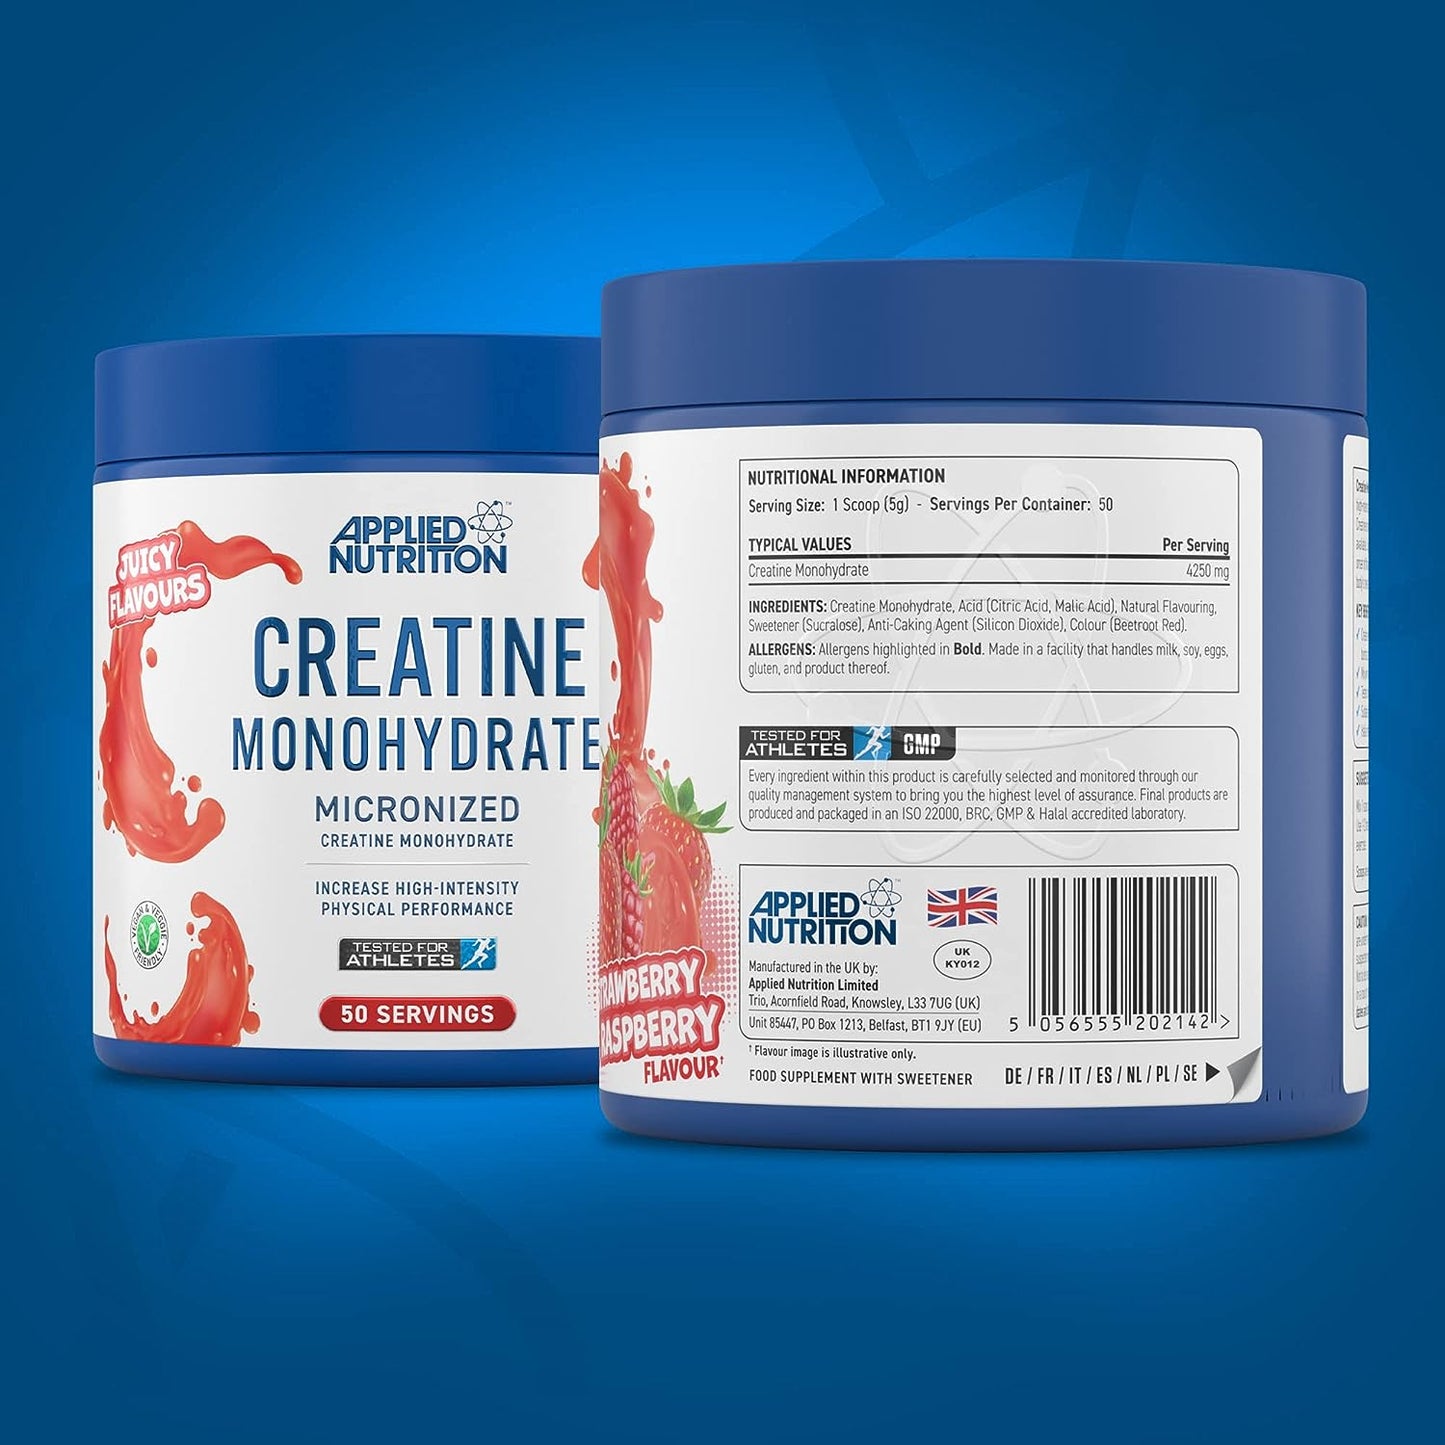 Applied Nutrition - Creatine Monohydrate Strawberry & Raspberry 50 Servings